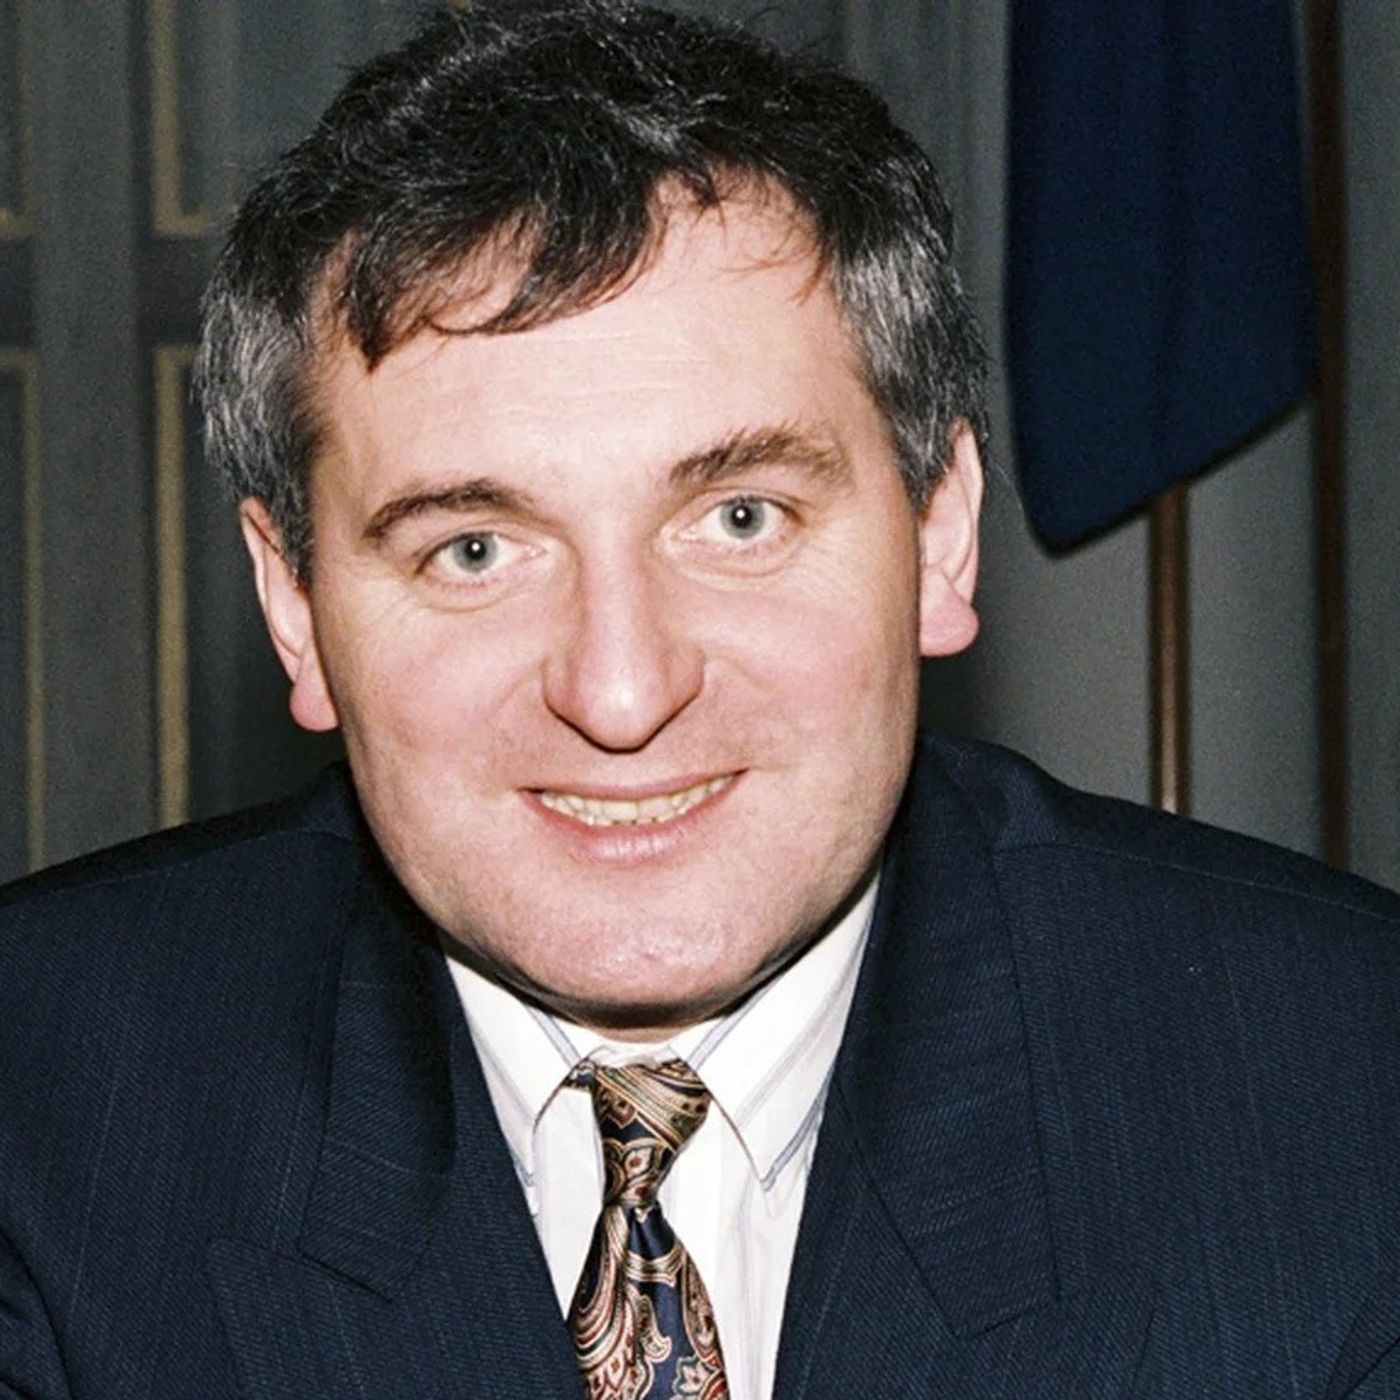 Bertie - The Rise of Ahern (Part 1)